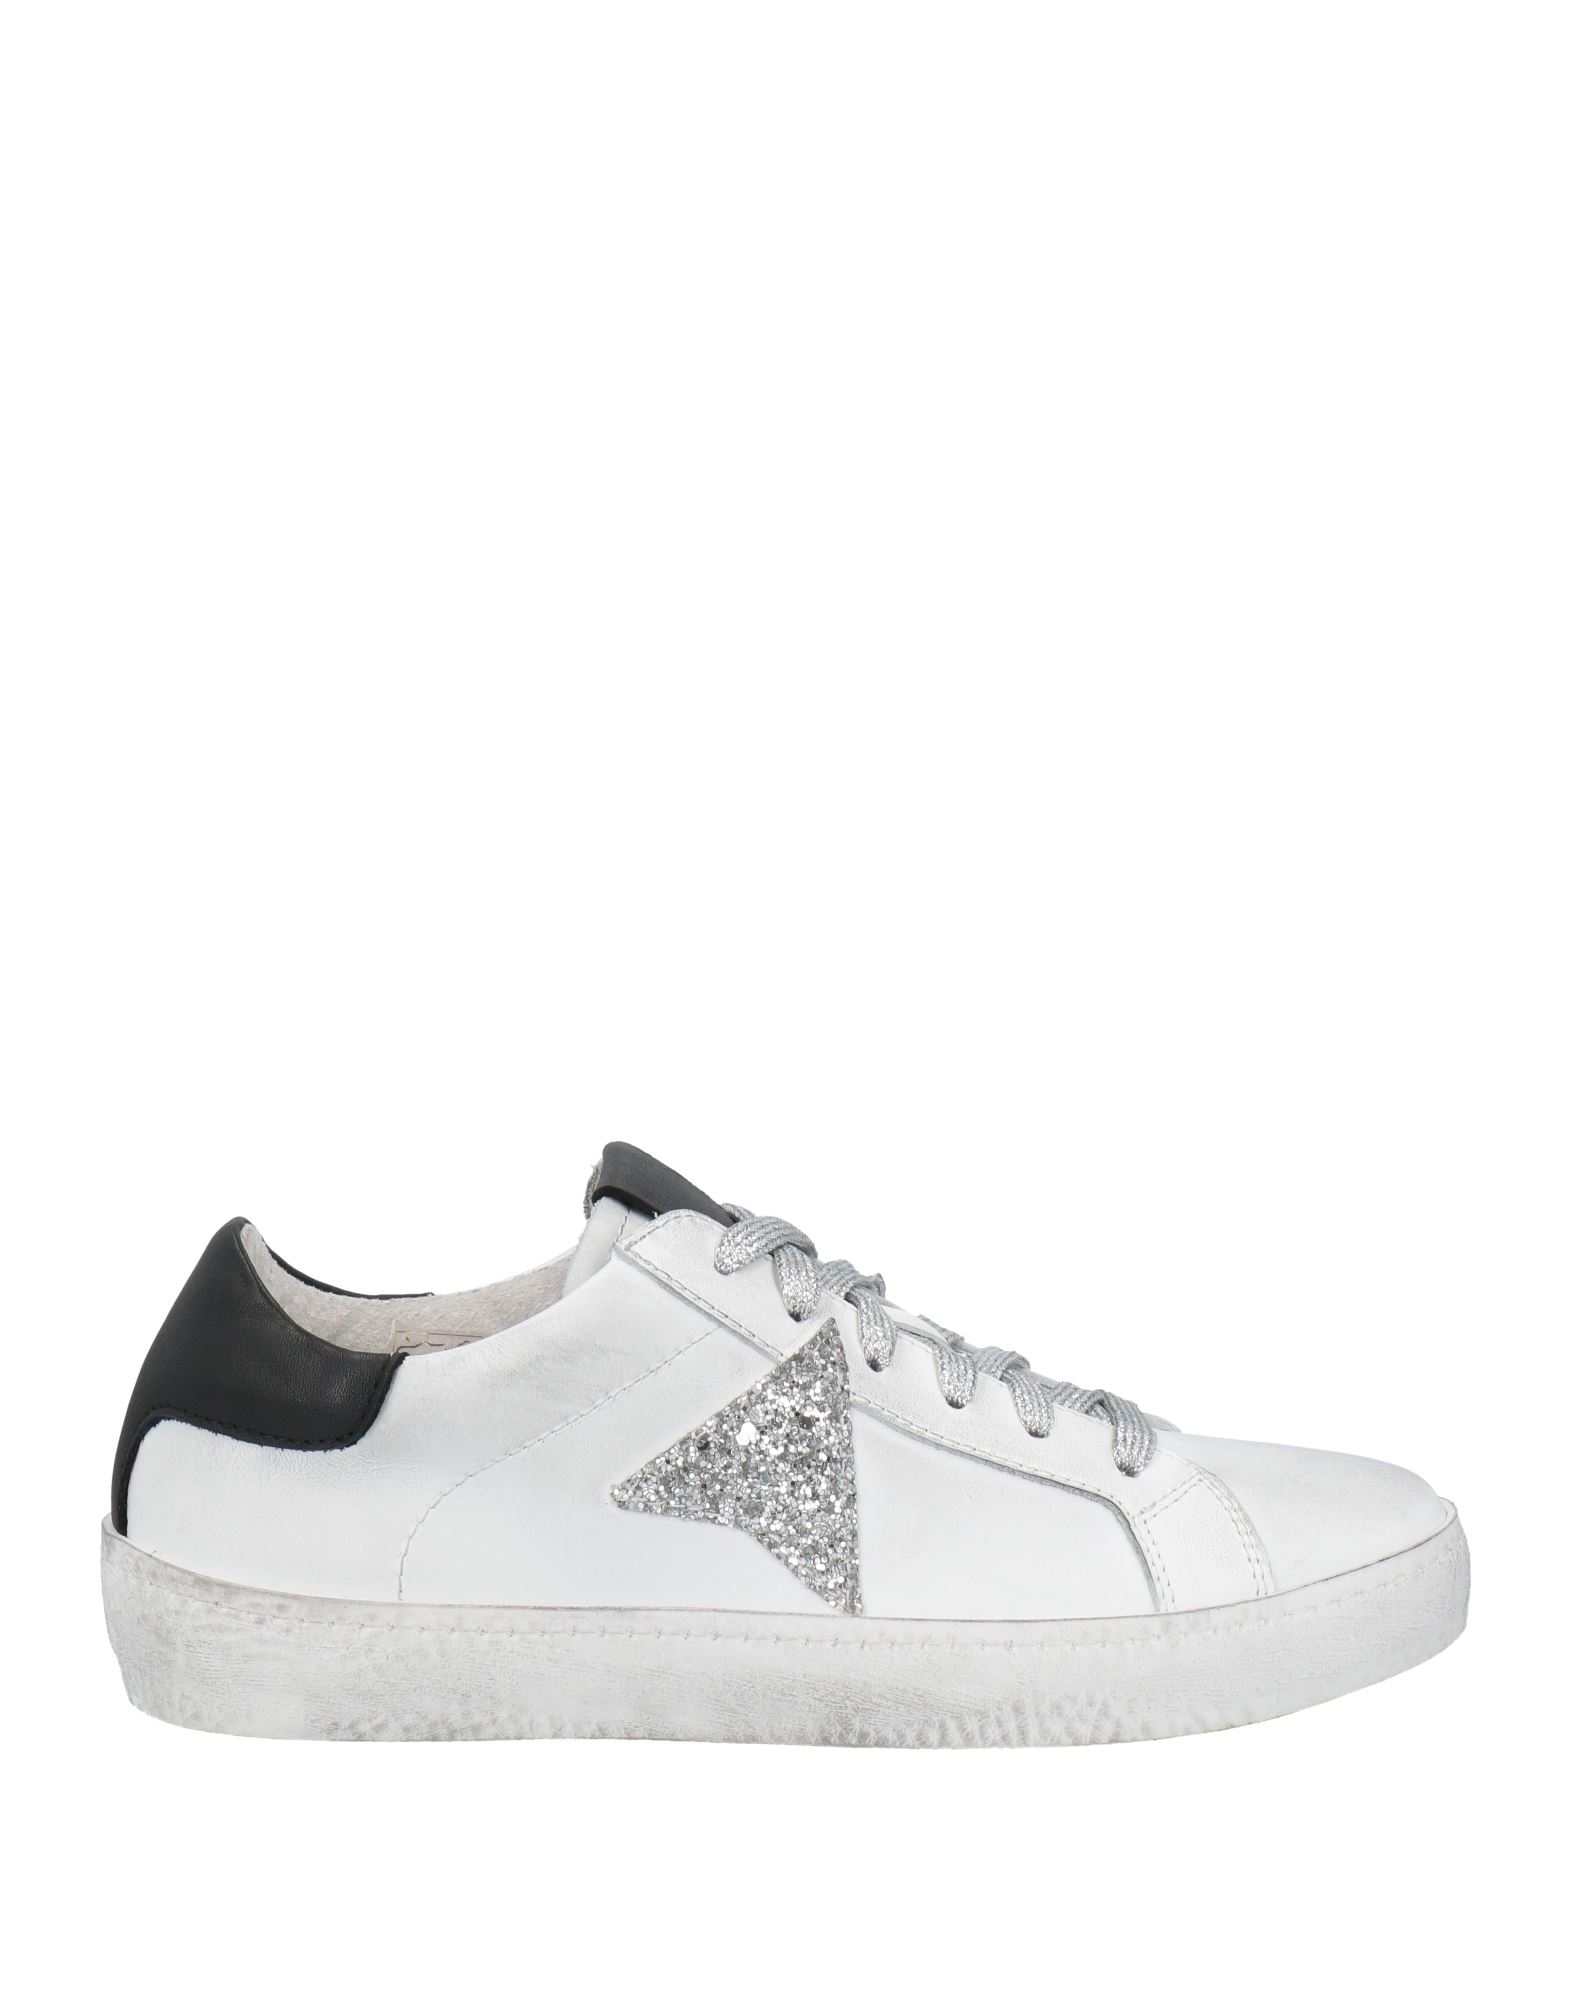 Shop Geneve Woman Sneakers White Size 6 Soft Leather